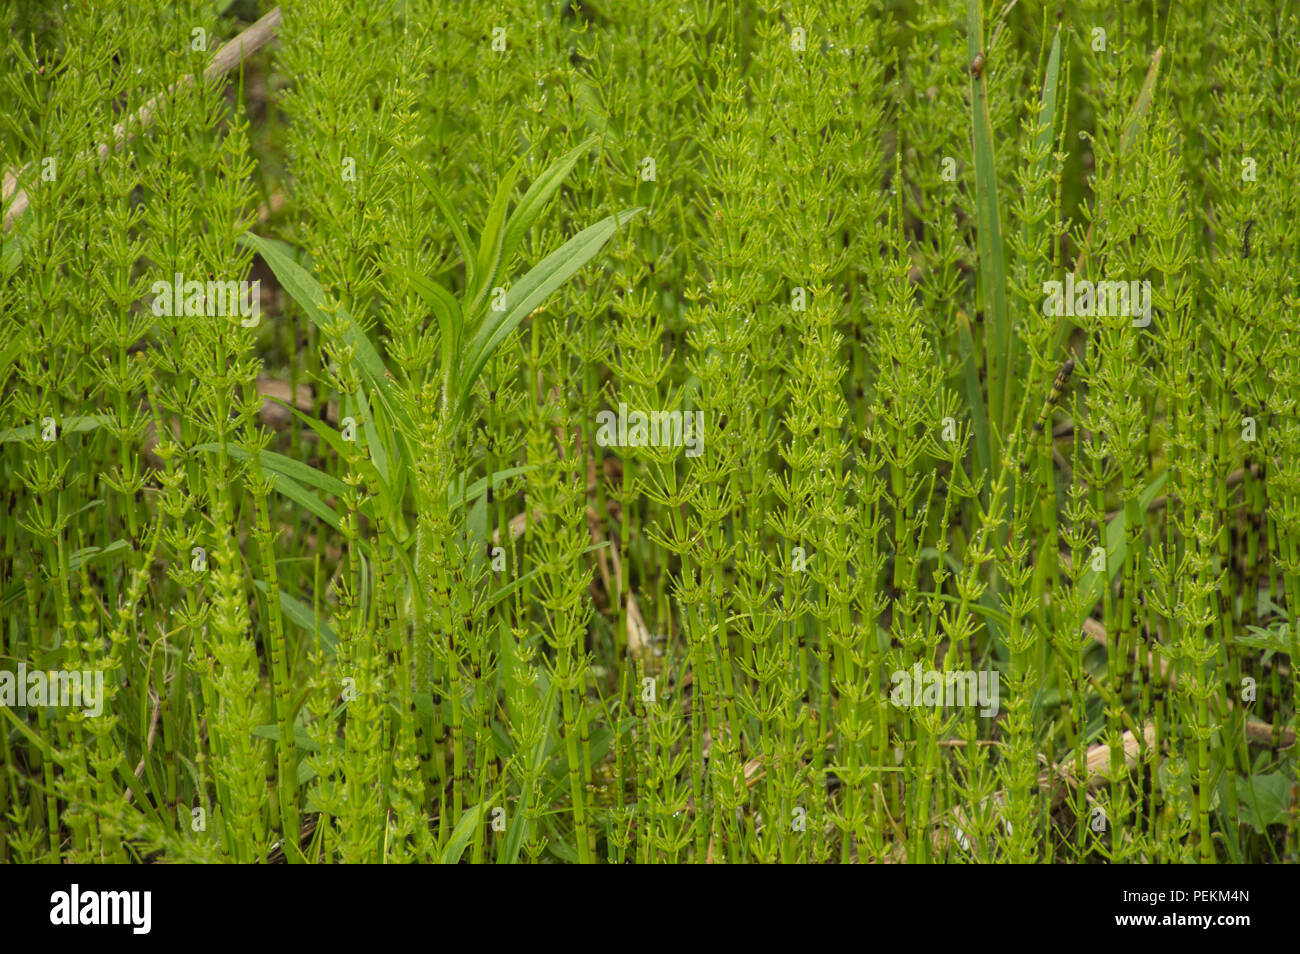 Wild herb Horsetail Equisetum growing in abundance in a wet swampy clearing Stock Photo